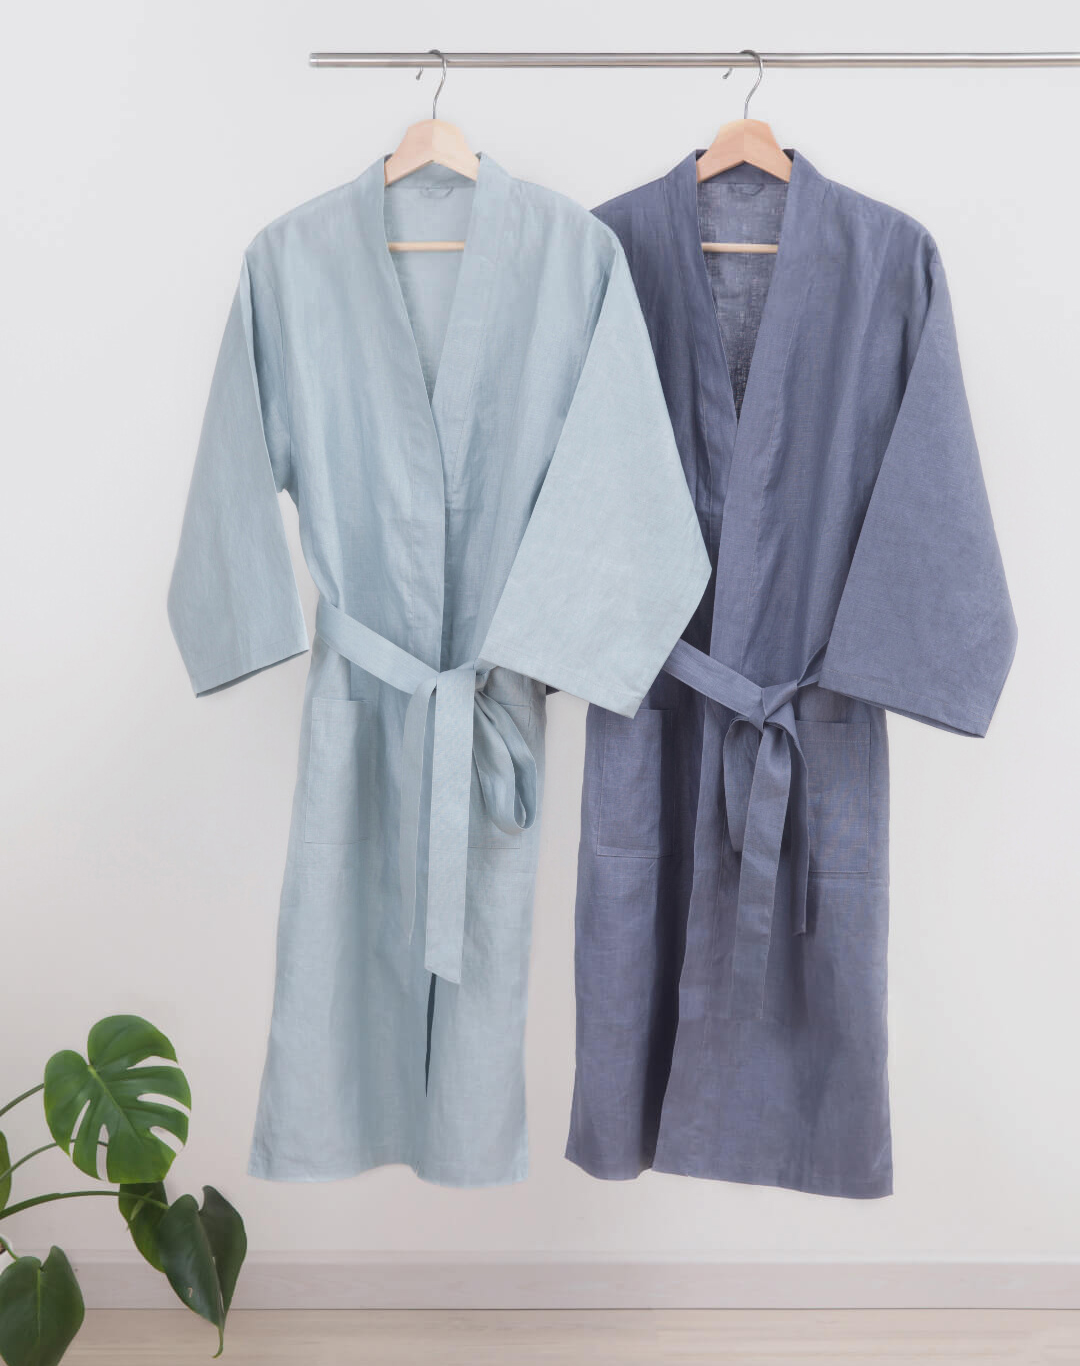 ZaxArt-Linen-Couple-Nightgown-Grey- ZY170908